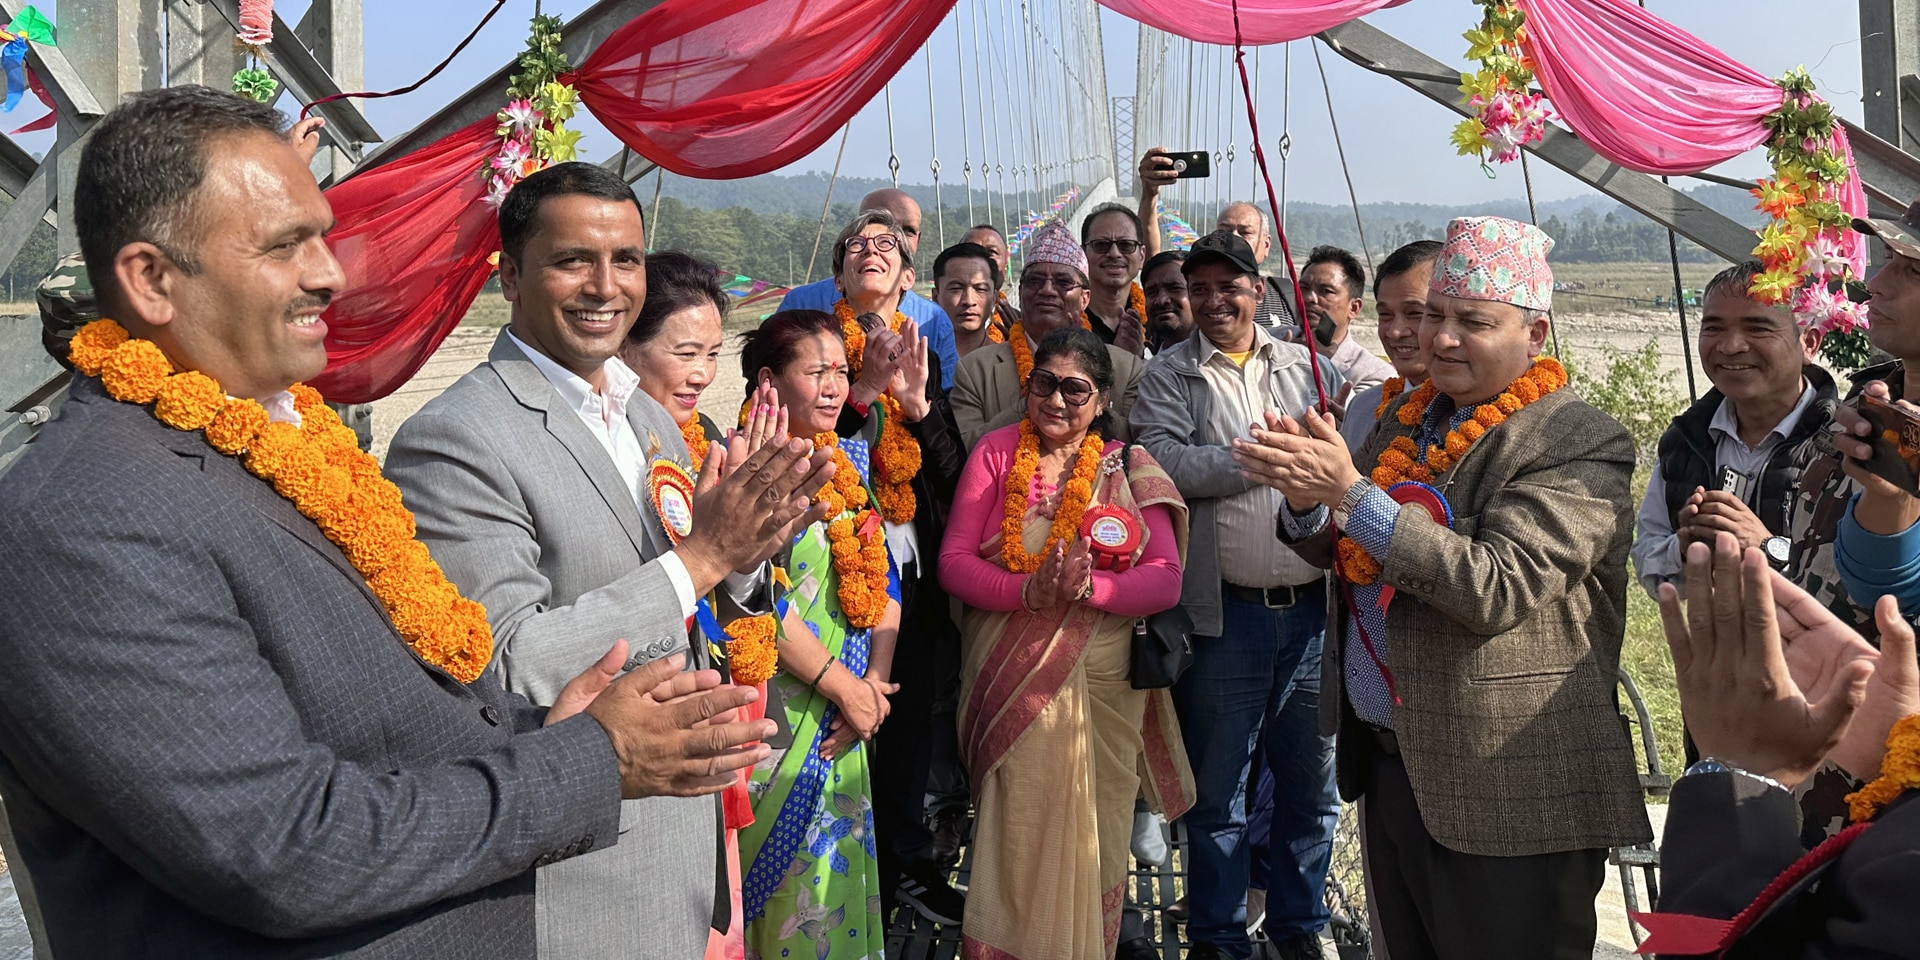 Representatives of the Swiss Embassy and the Nepalese government at the inauguration of the Marin Khola Bridge on 9 November in Bagmati Province.